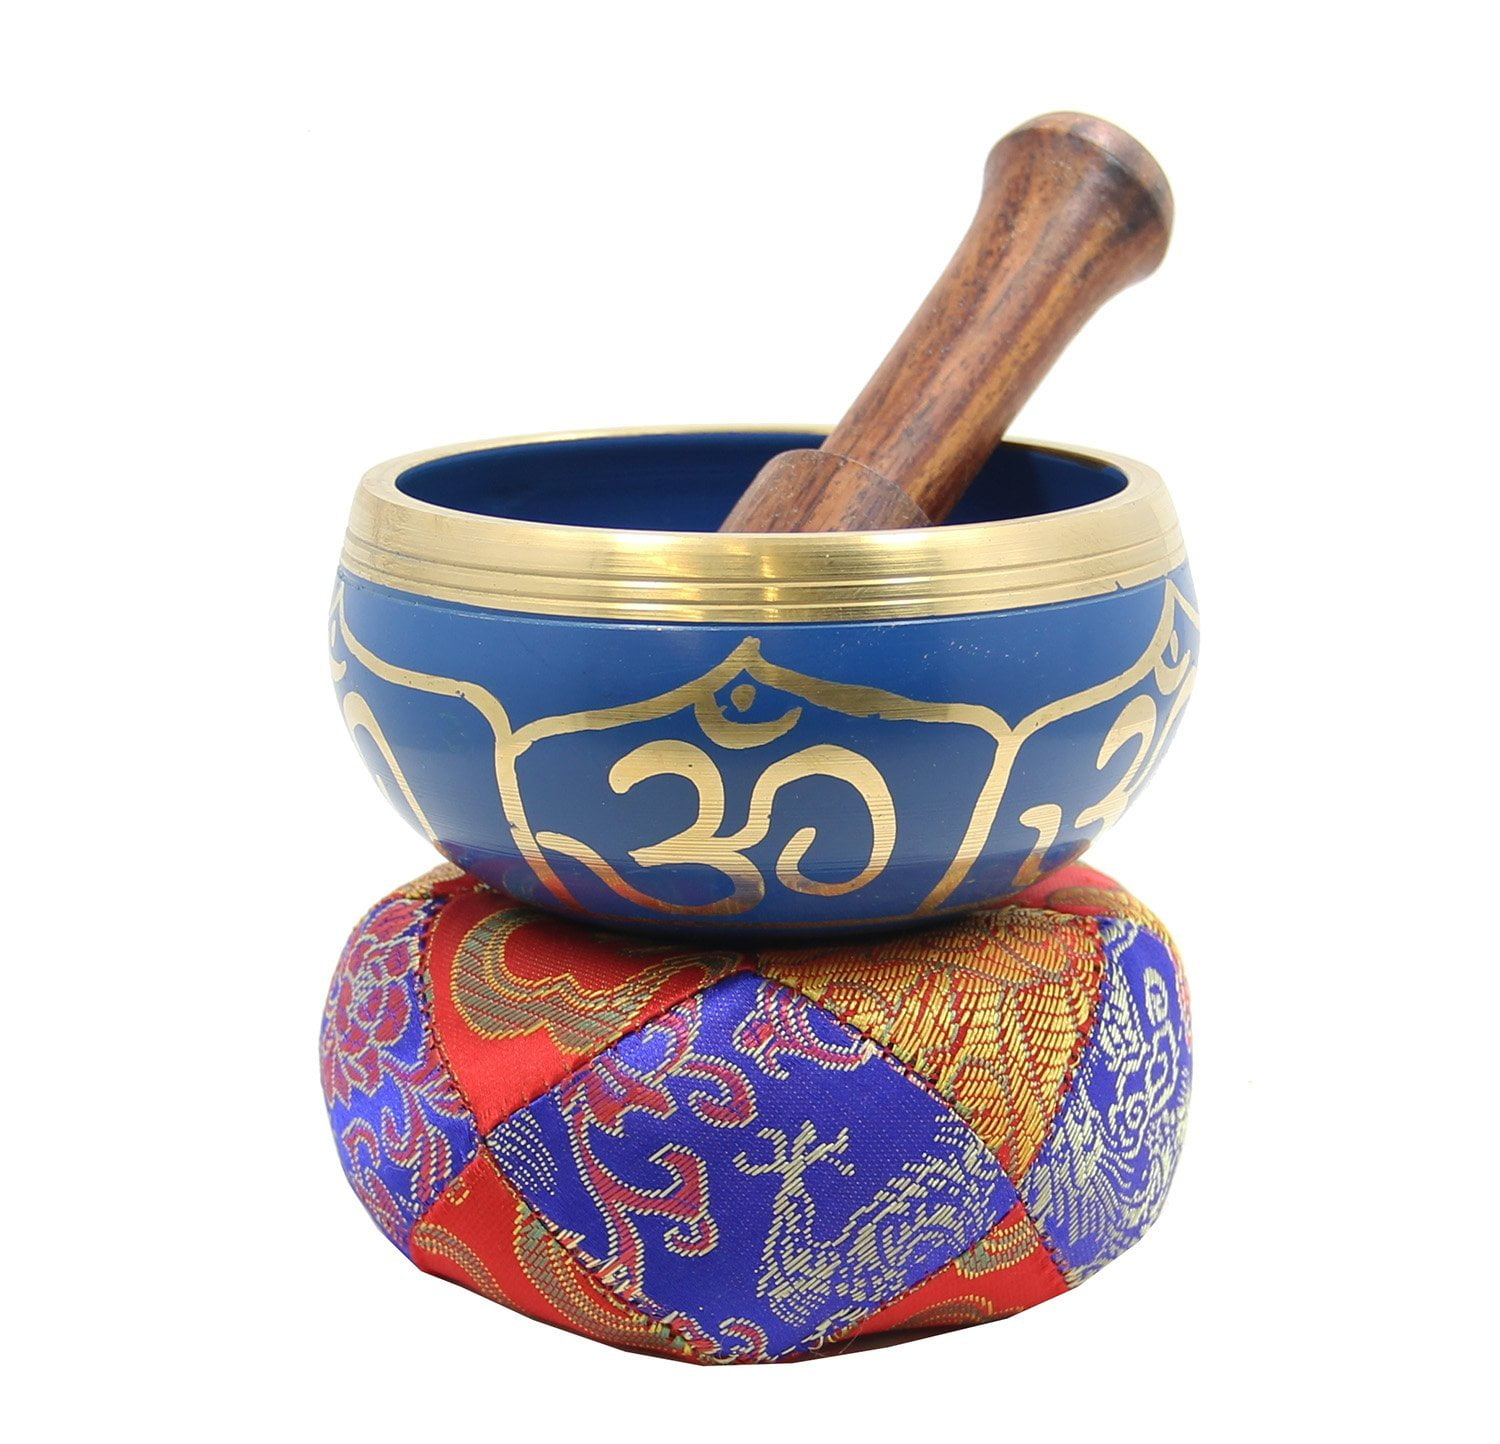 With Traditional Design with Stick and Black Cushion Meditation Singing Bowl for Relaxation,Healing and for your silent mind 4 Diameter